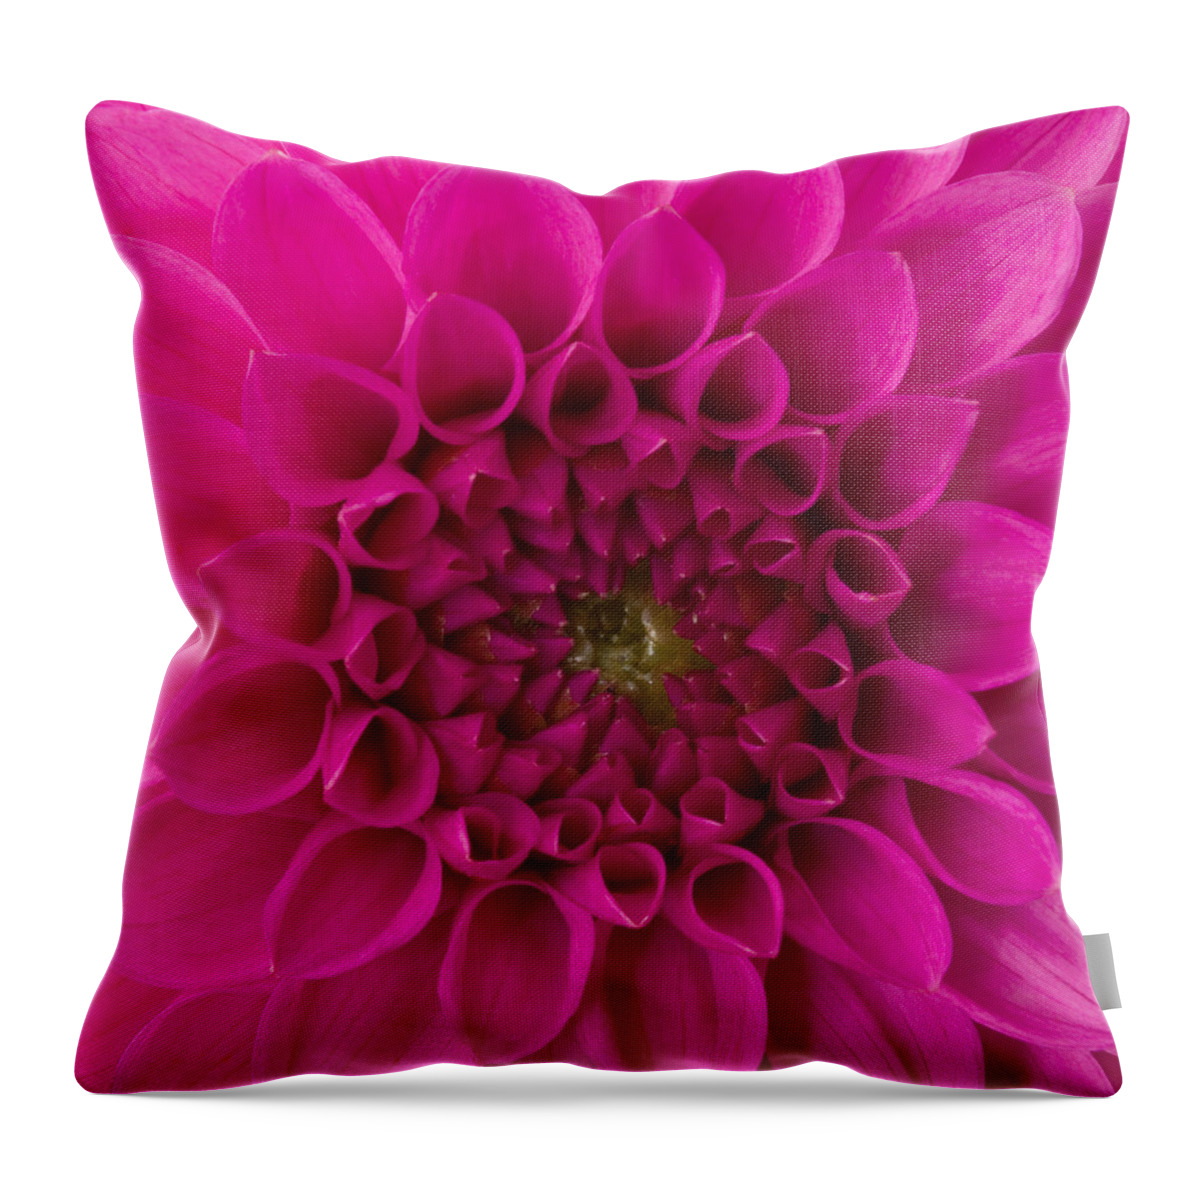 Saturated Color Throw Pillow featuring the photograph Dahlia #2 by Vidok